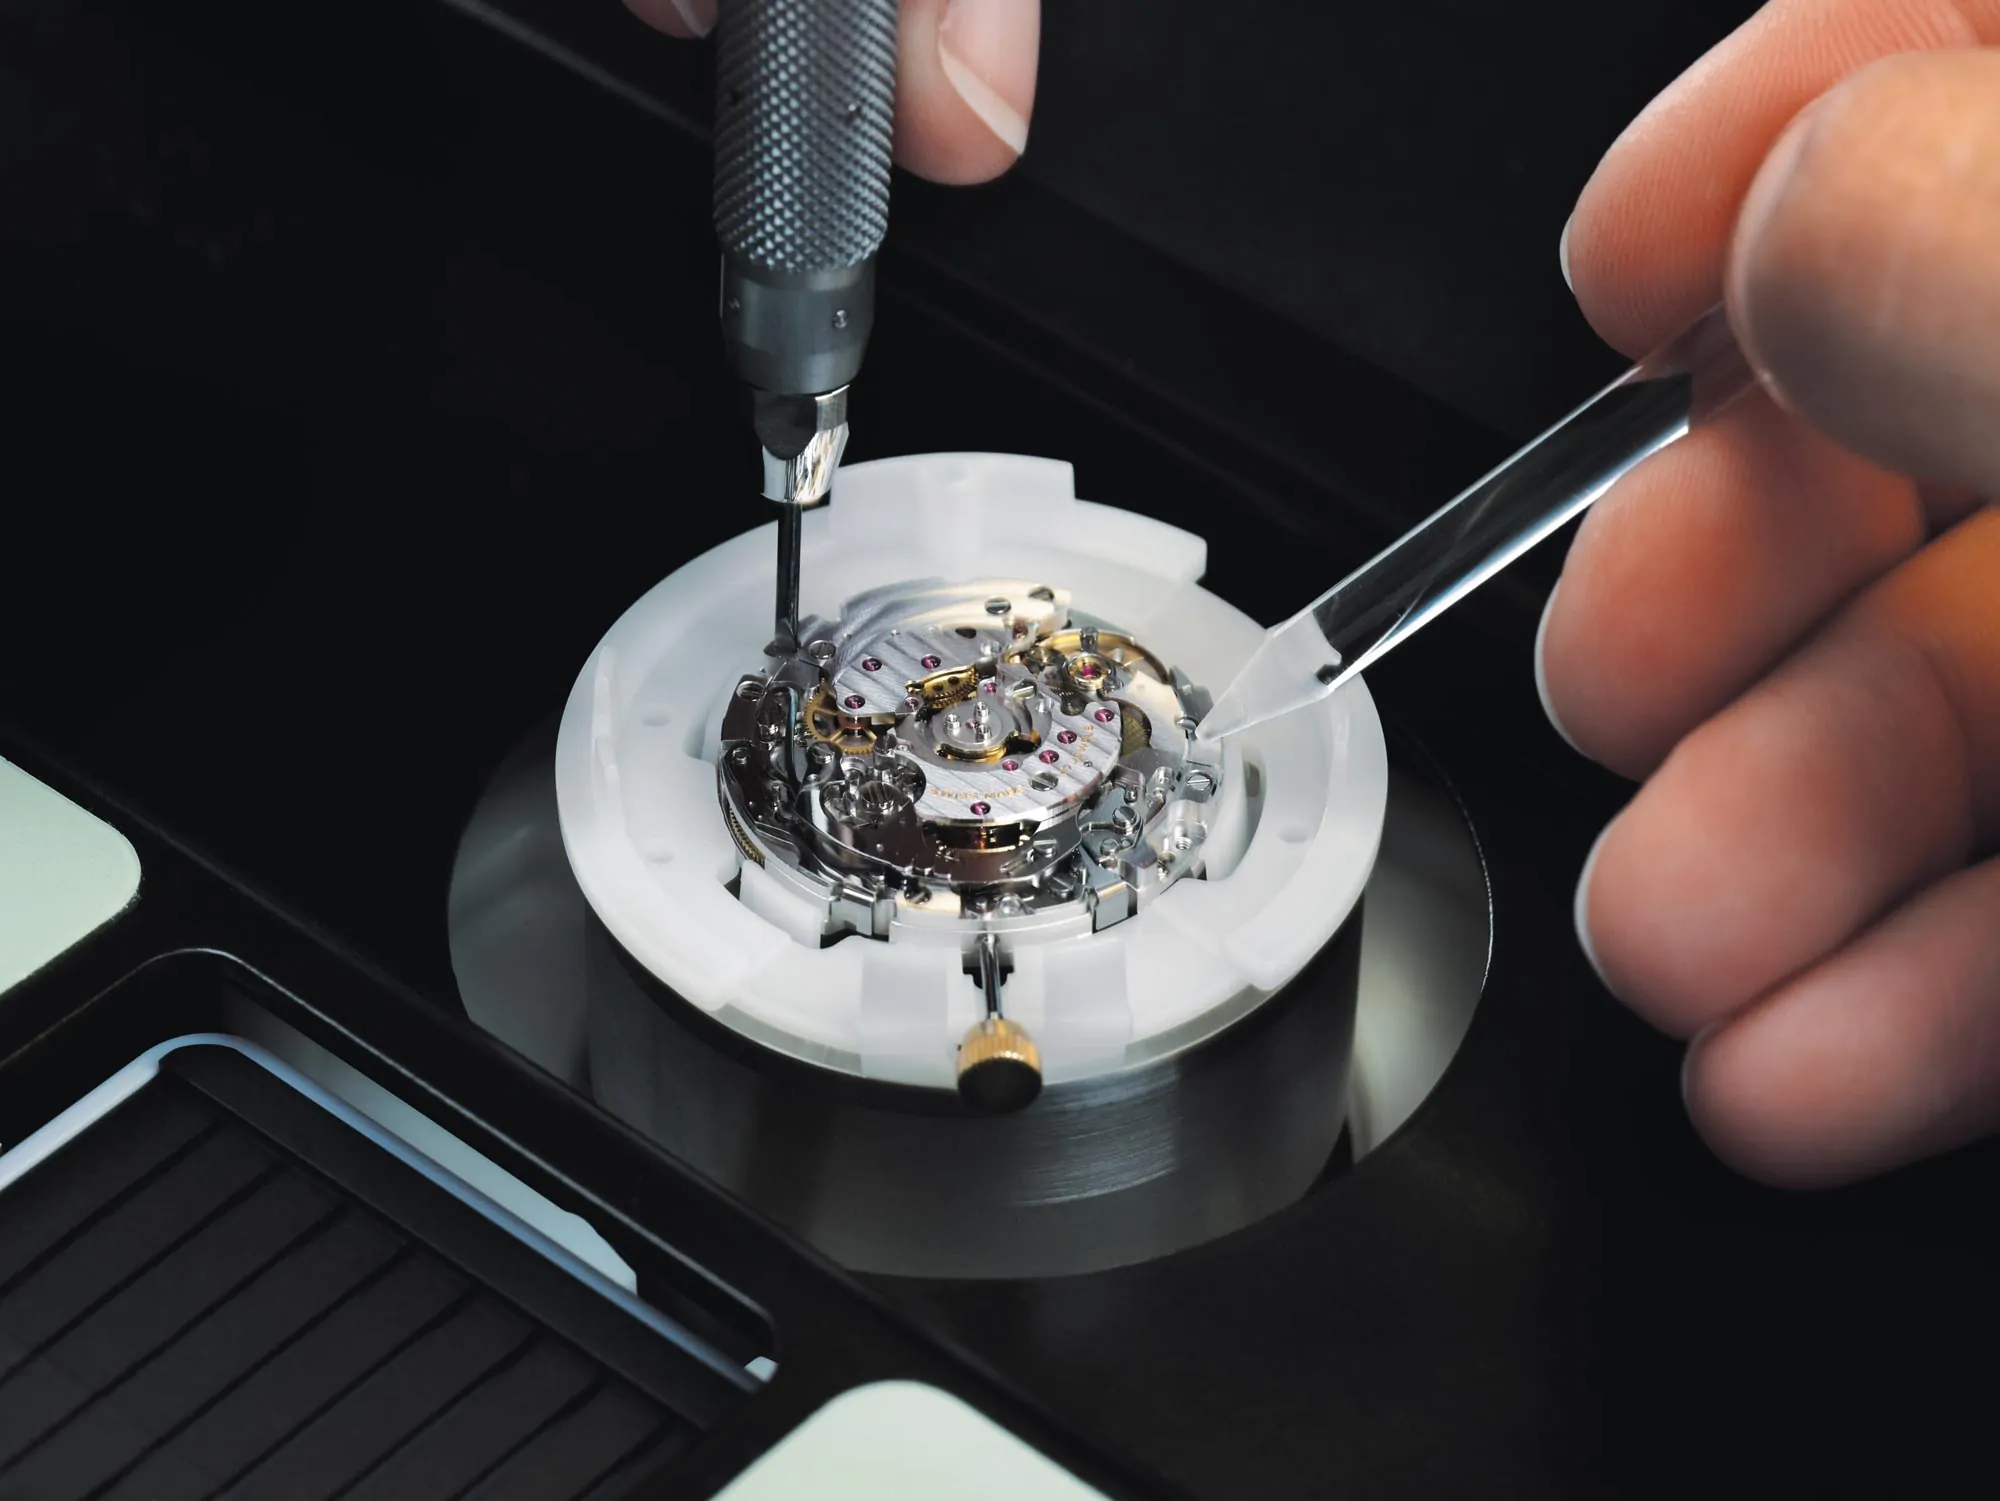 The Chronograph - A Look at Watch Movements